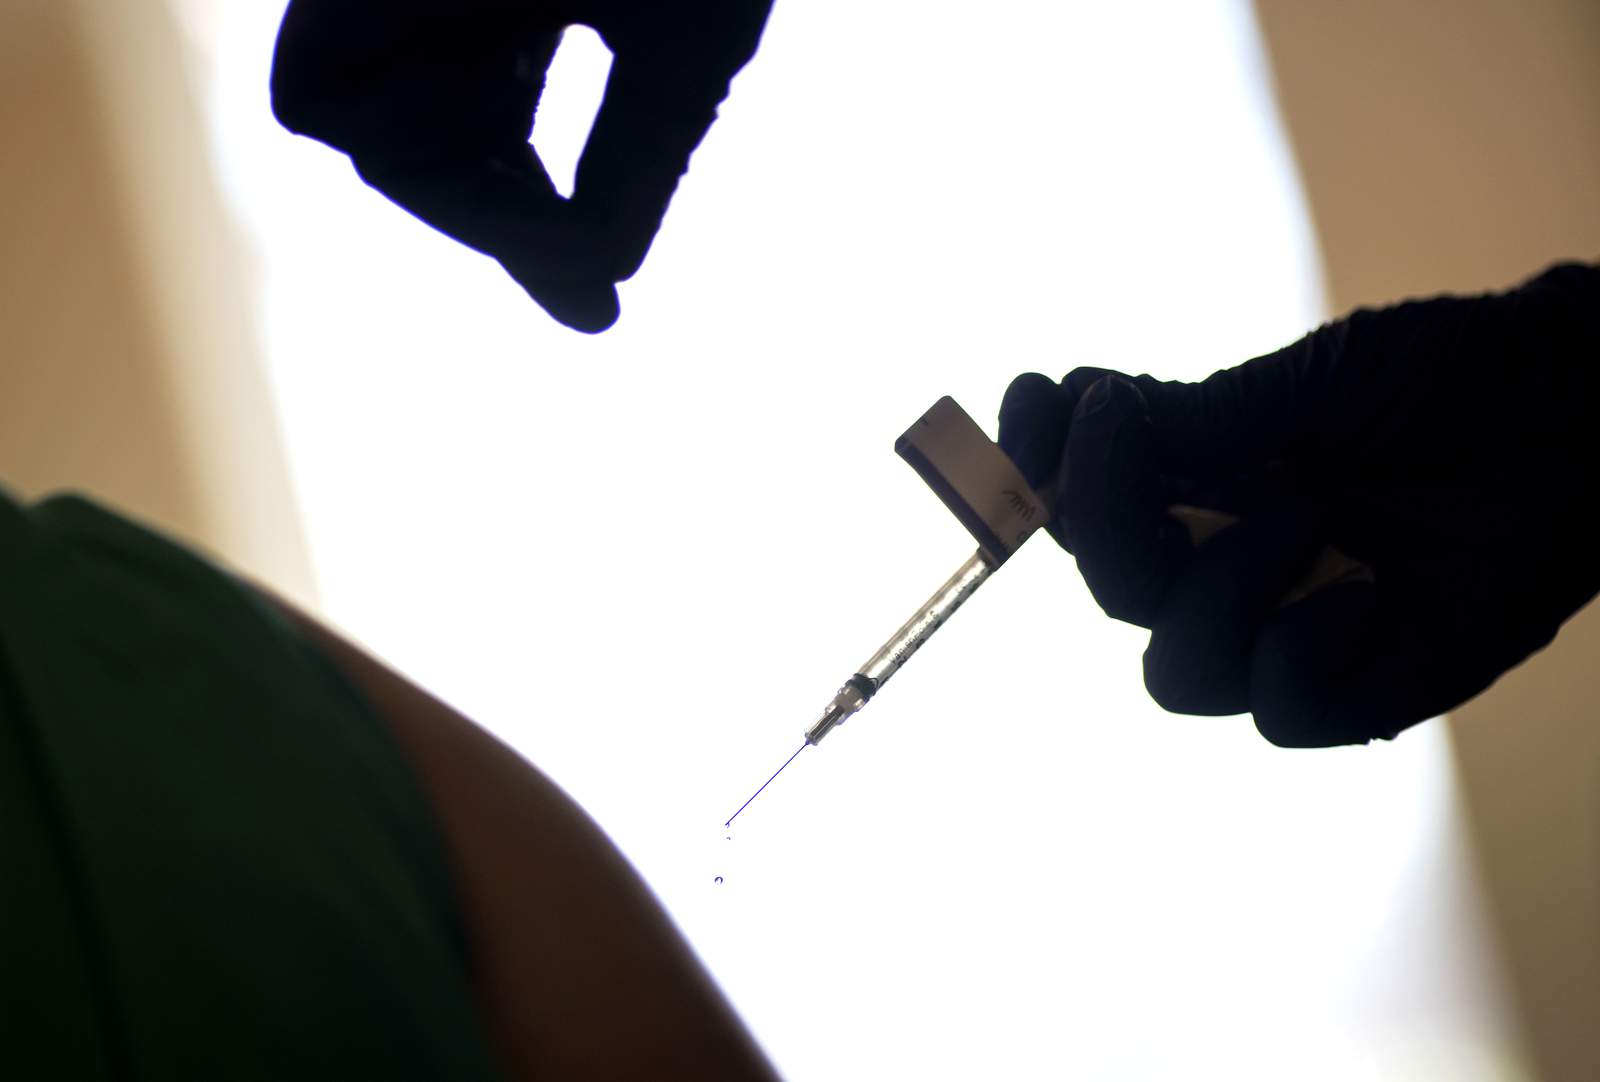 Vaccine fraud bill getting teed up in Florida House